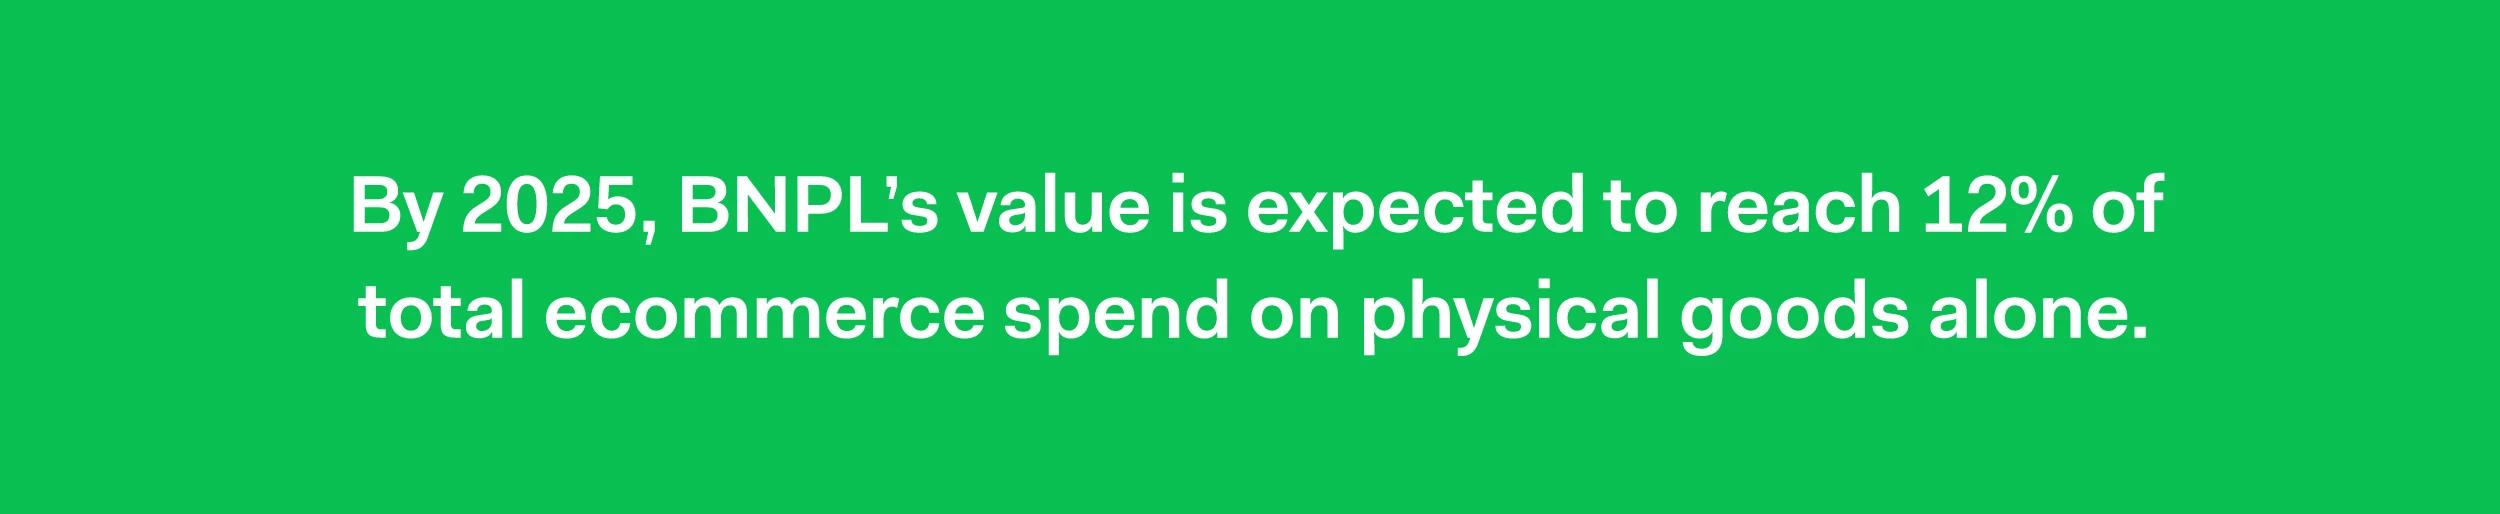 By 2025, BNPL’s value is expected to reach 12% of total ecommerce spend on physical goods alone.